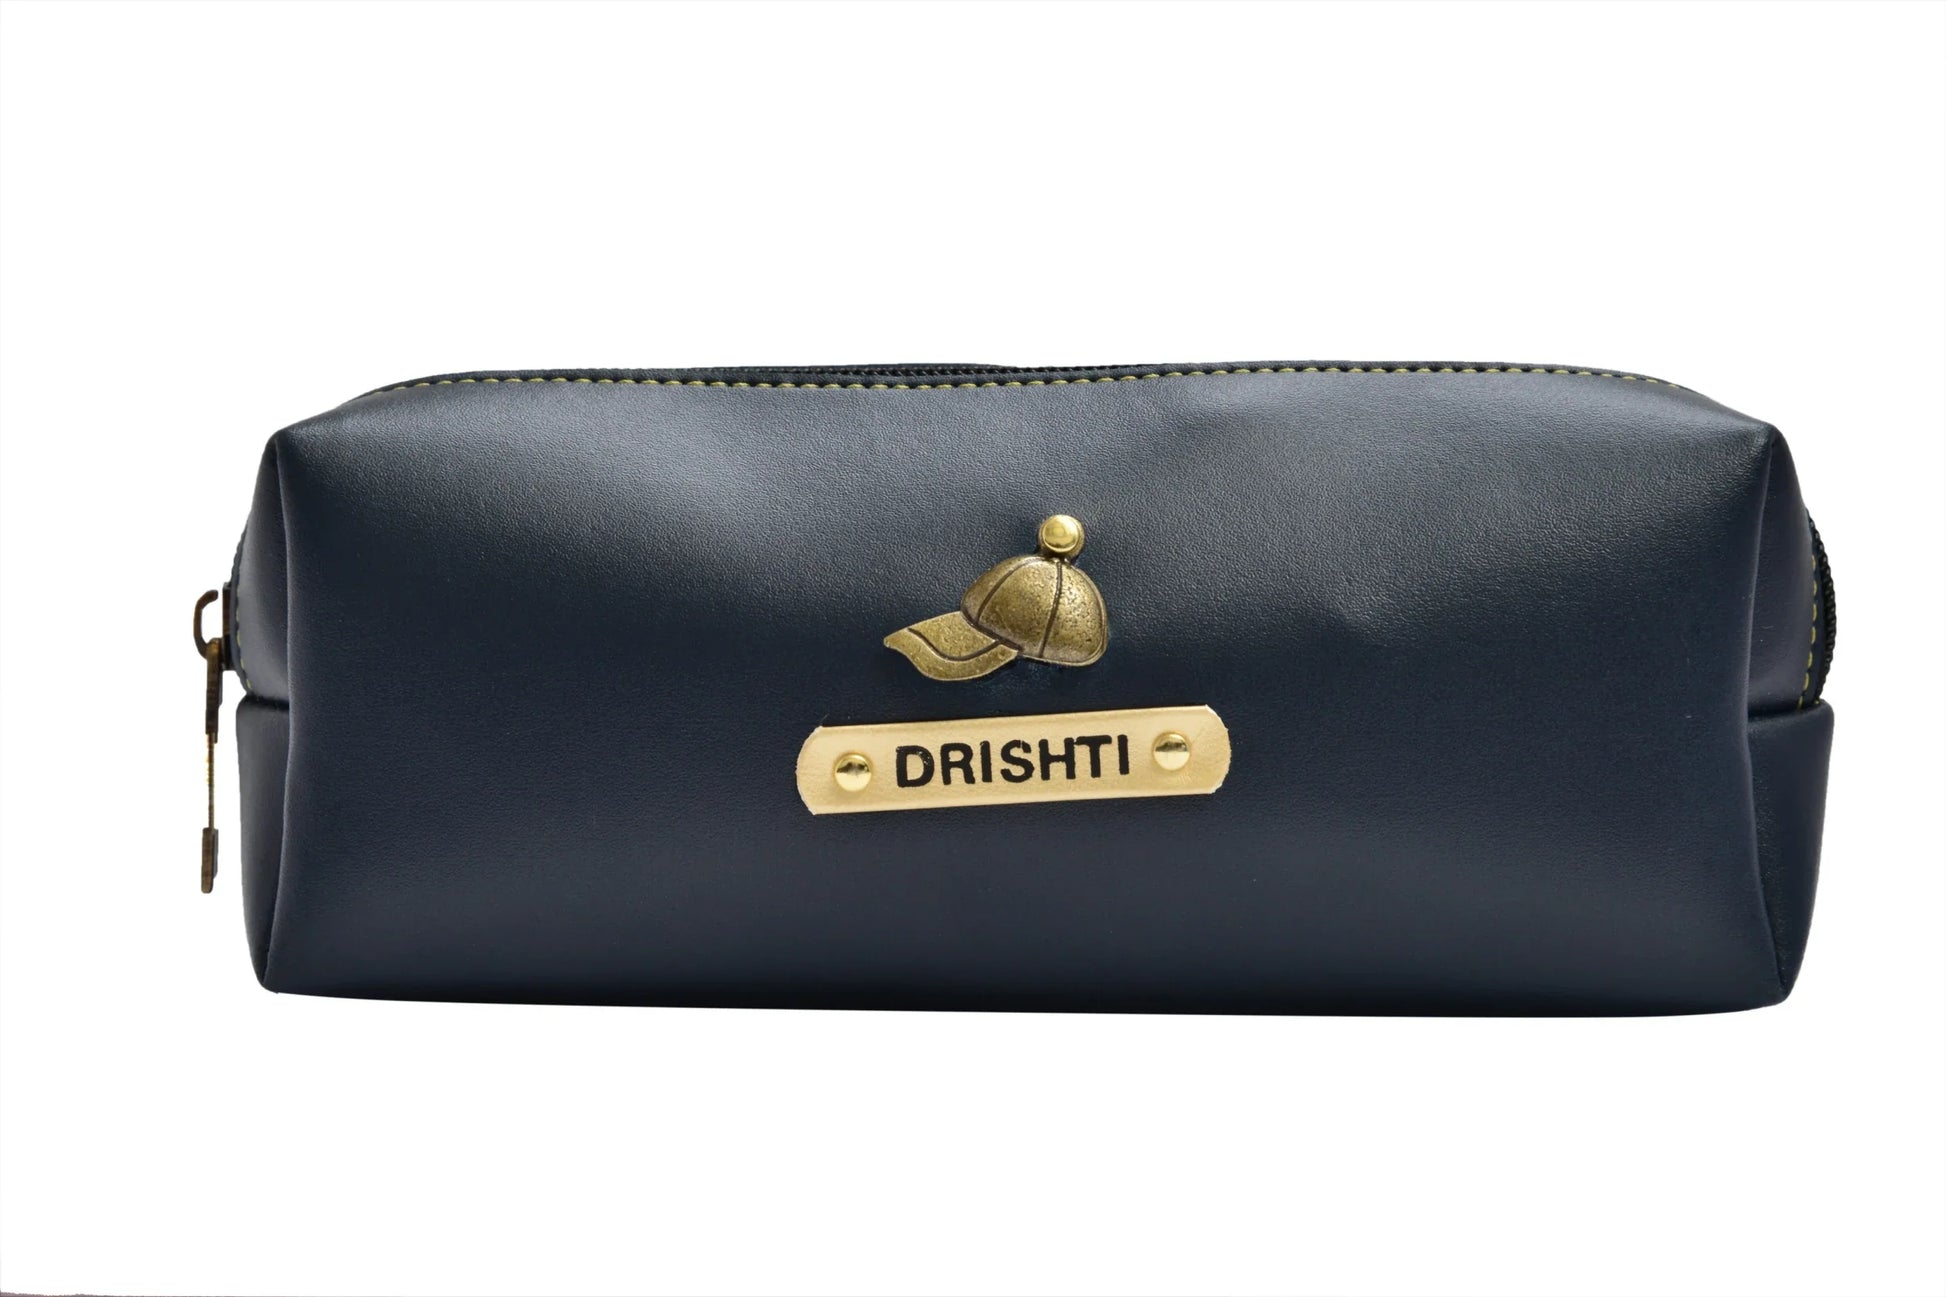 "Premium Quality: Crafted with meticulous attention to detail, our pencil pouch is made to withstand everyday use and offer long-lasting durability."